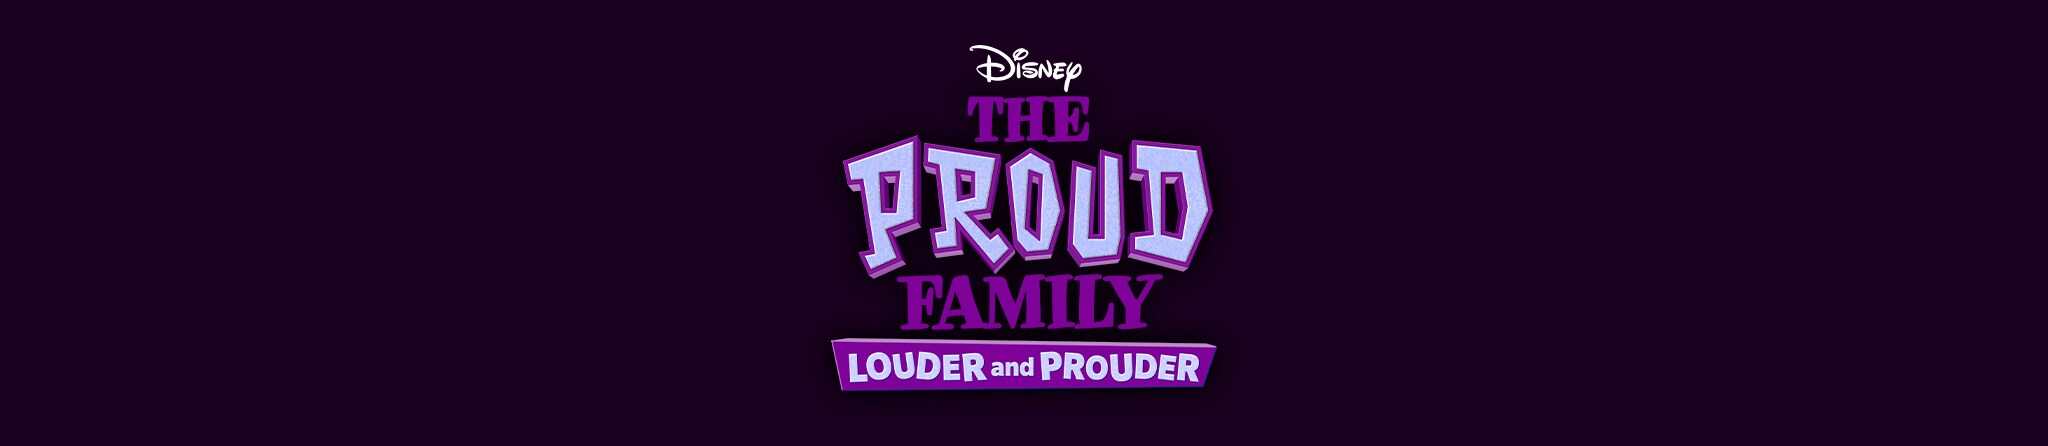 Disney | The Proud Family | Louder and Prouder